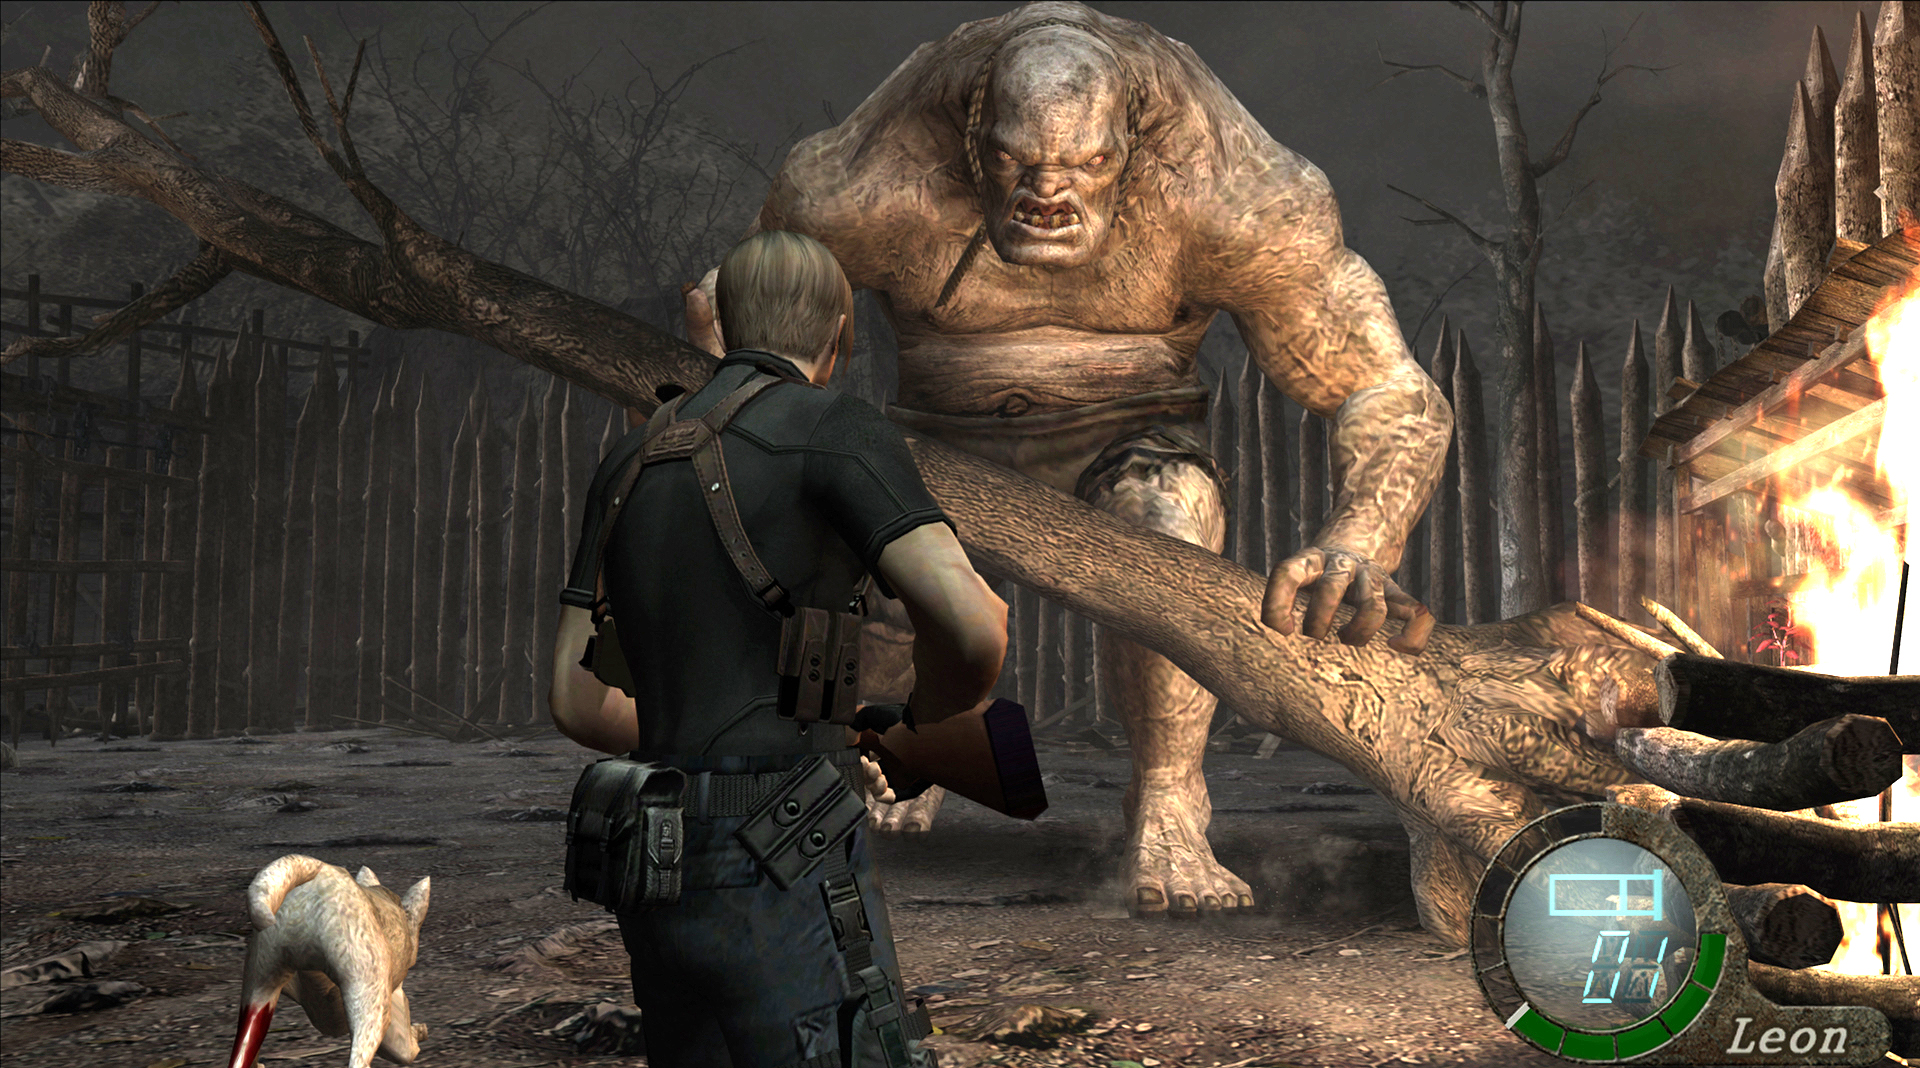 A screen shot from the original Resident Evil 4.